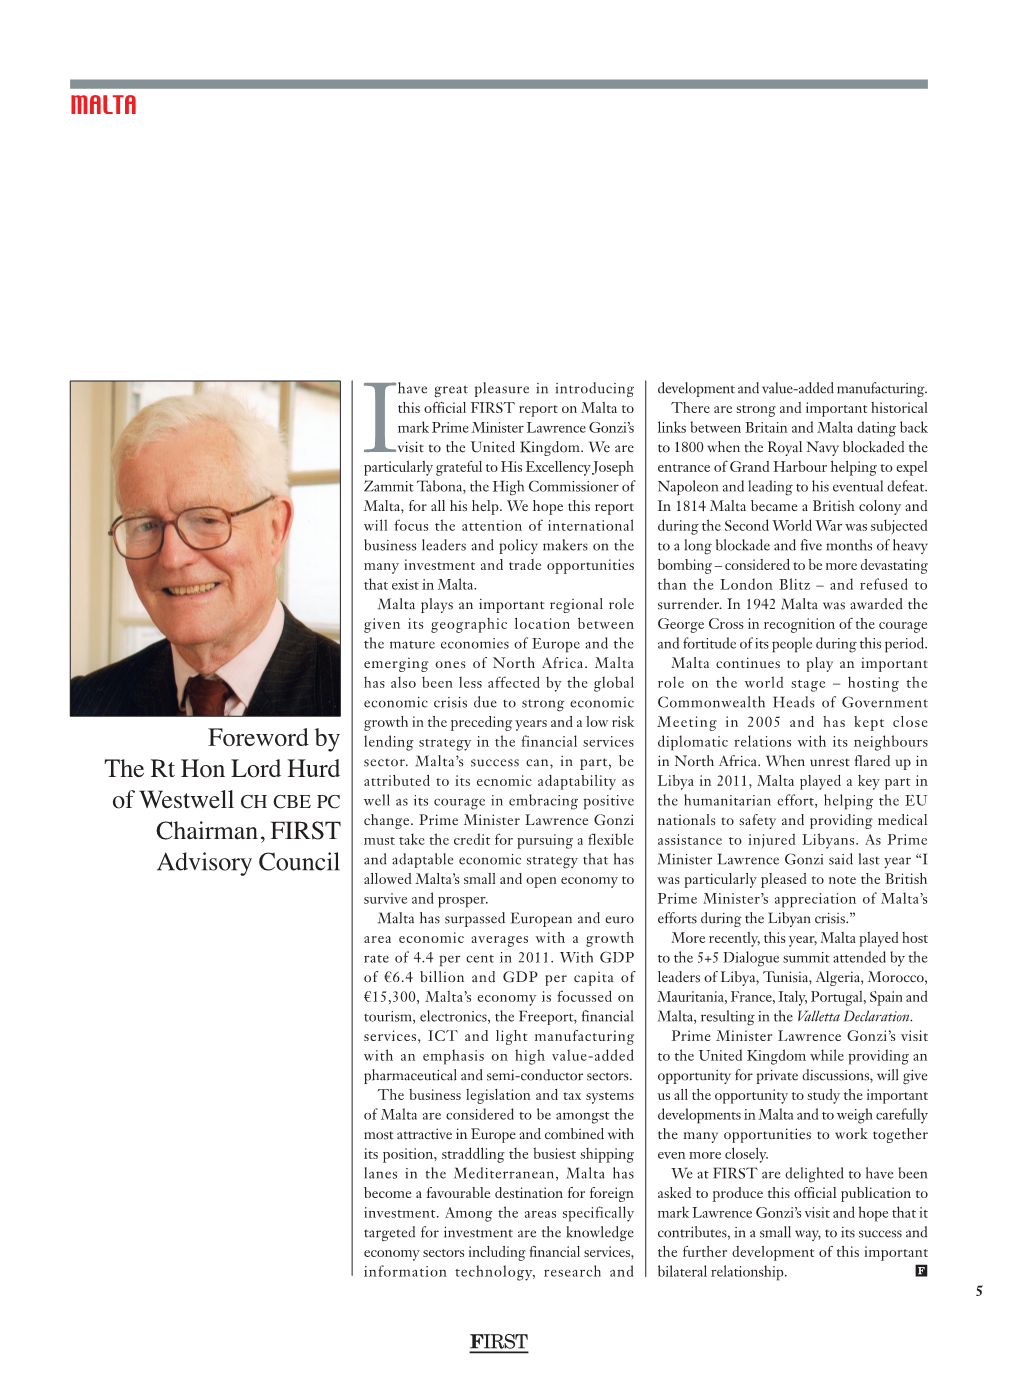 Foreword by the Rt Hon Lord Hurd of Westwell CH CBE PC Chairman